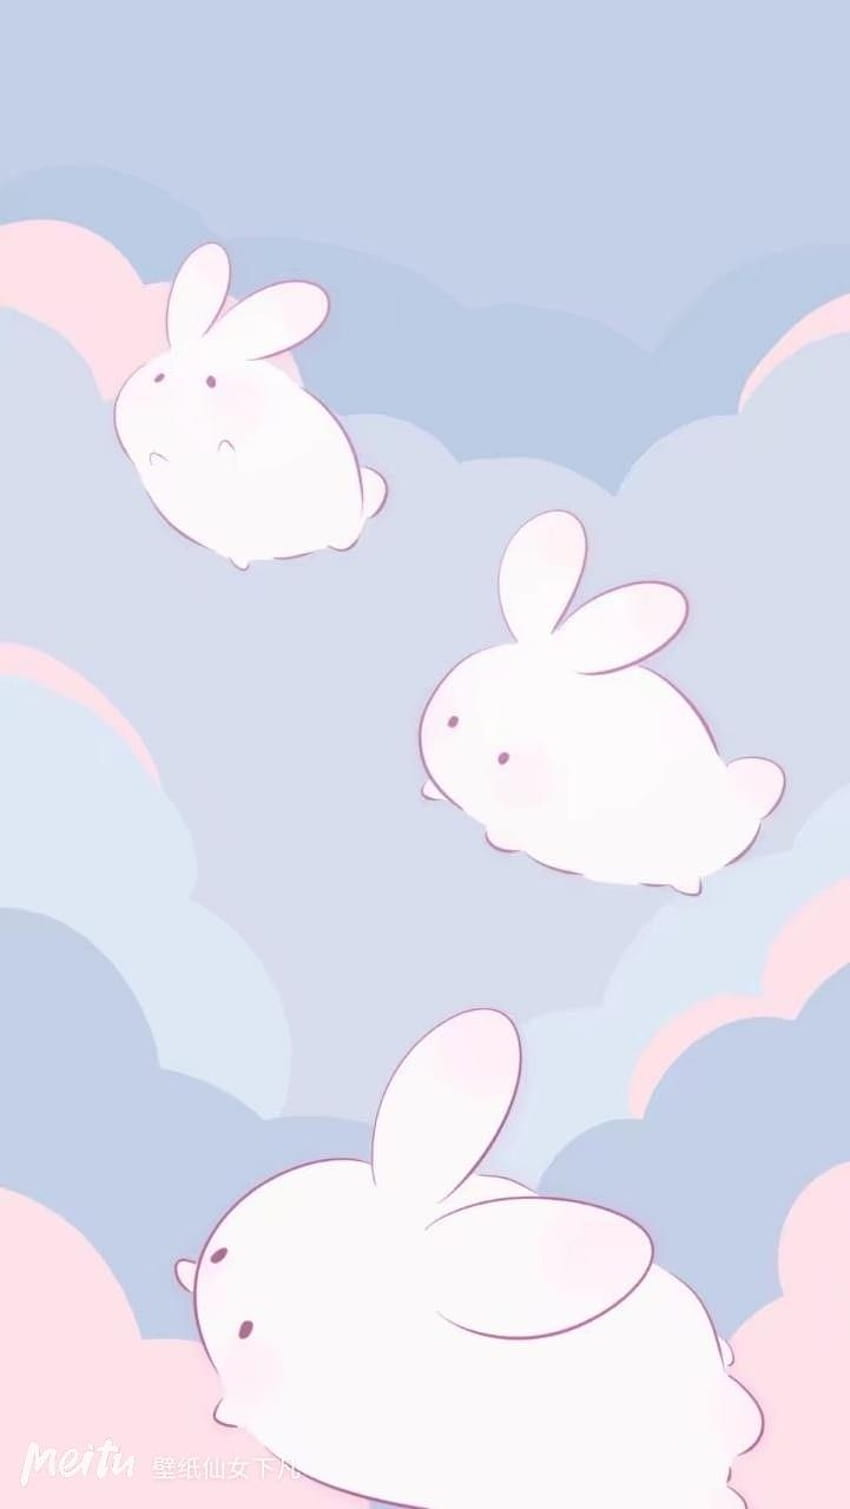 Blue Bunny posted by Michelle Sellers, rabbit aesthetic HD phone wallpaper